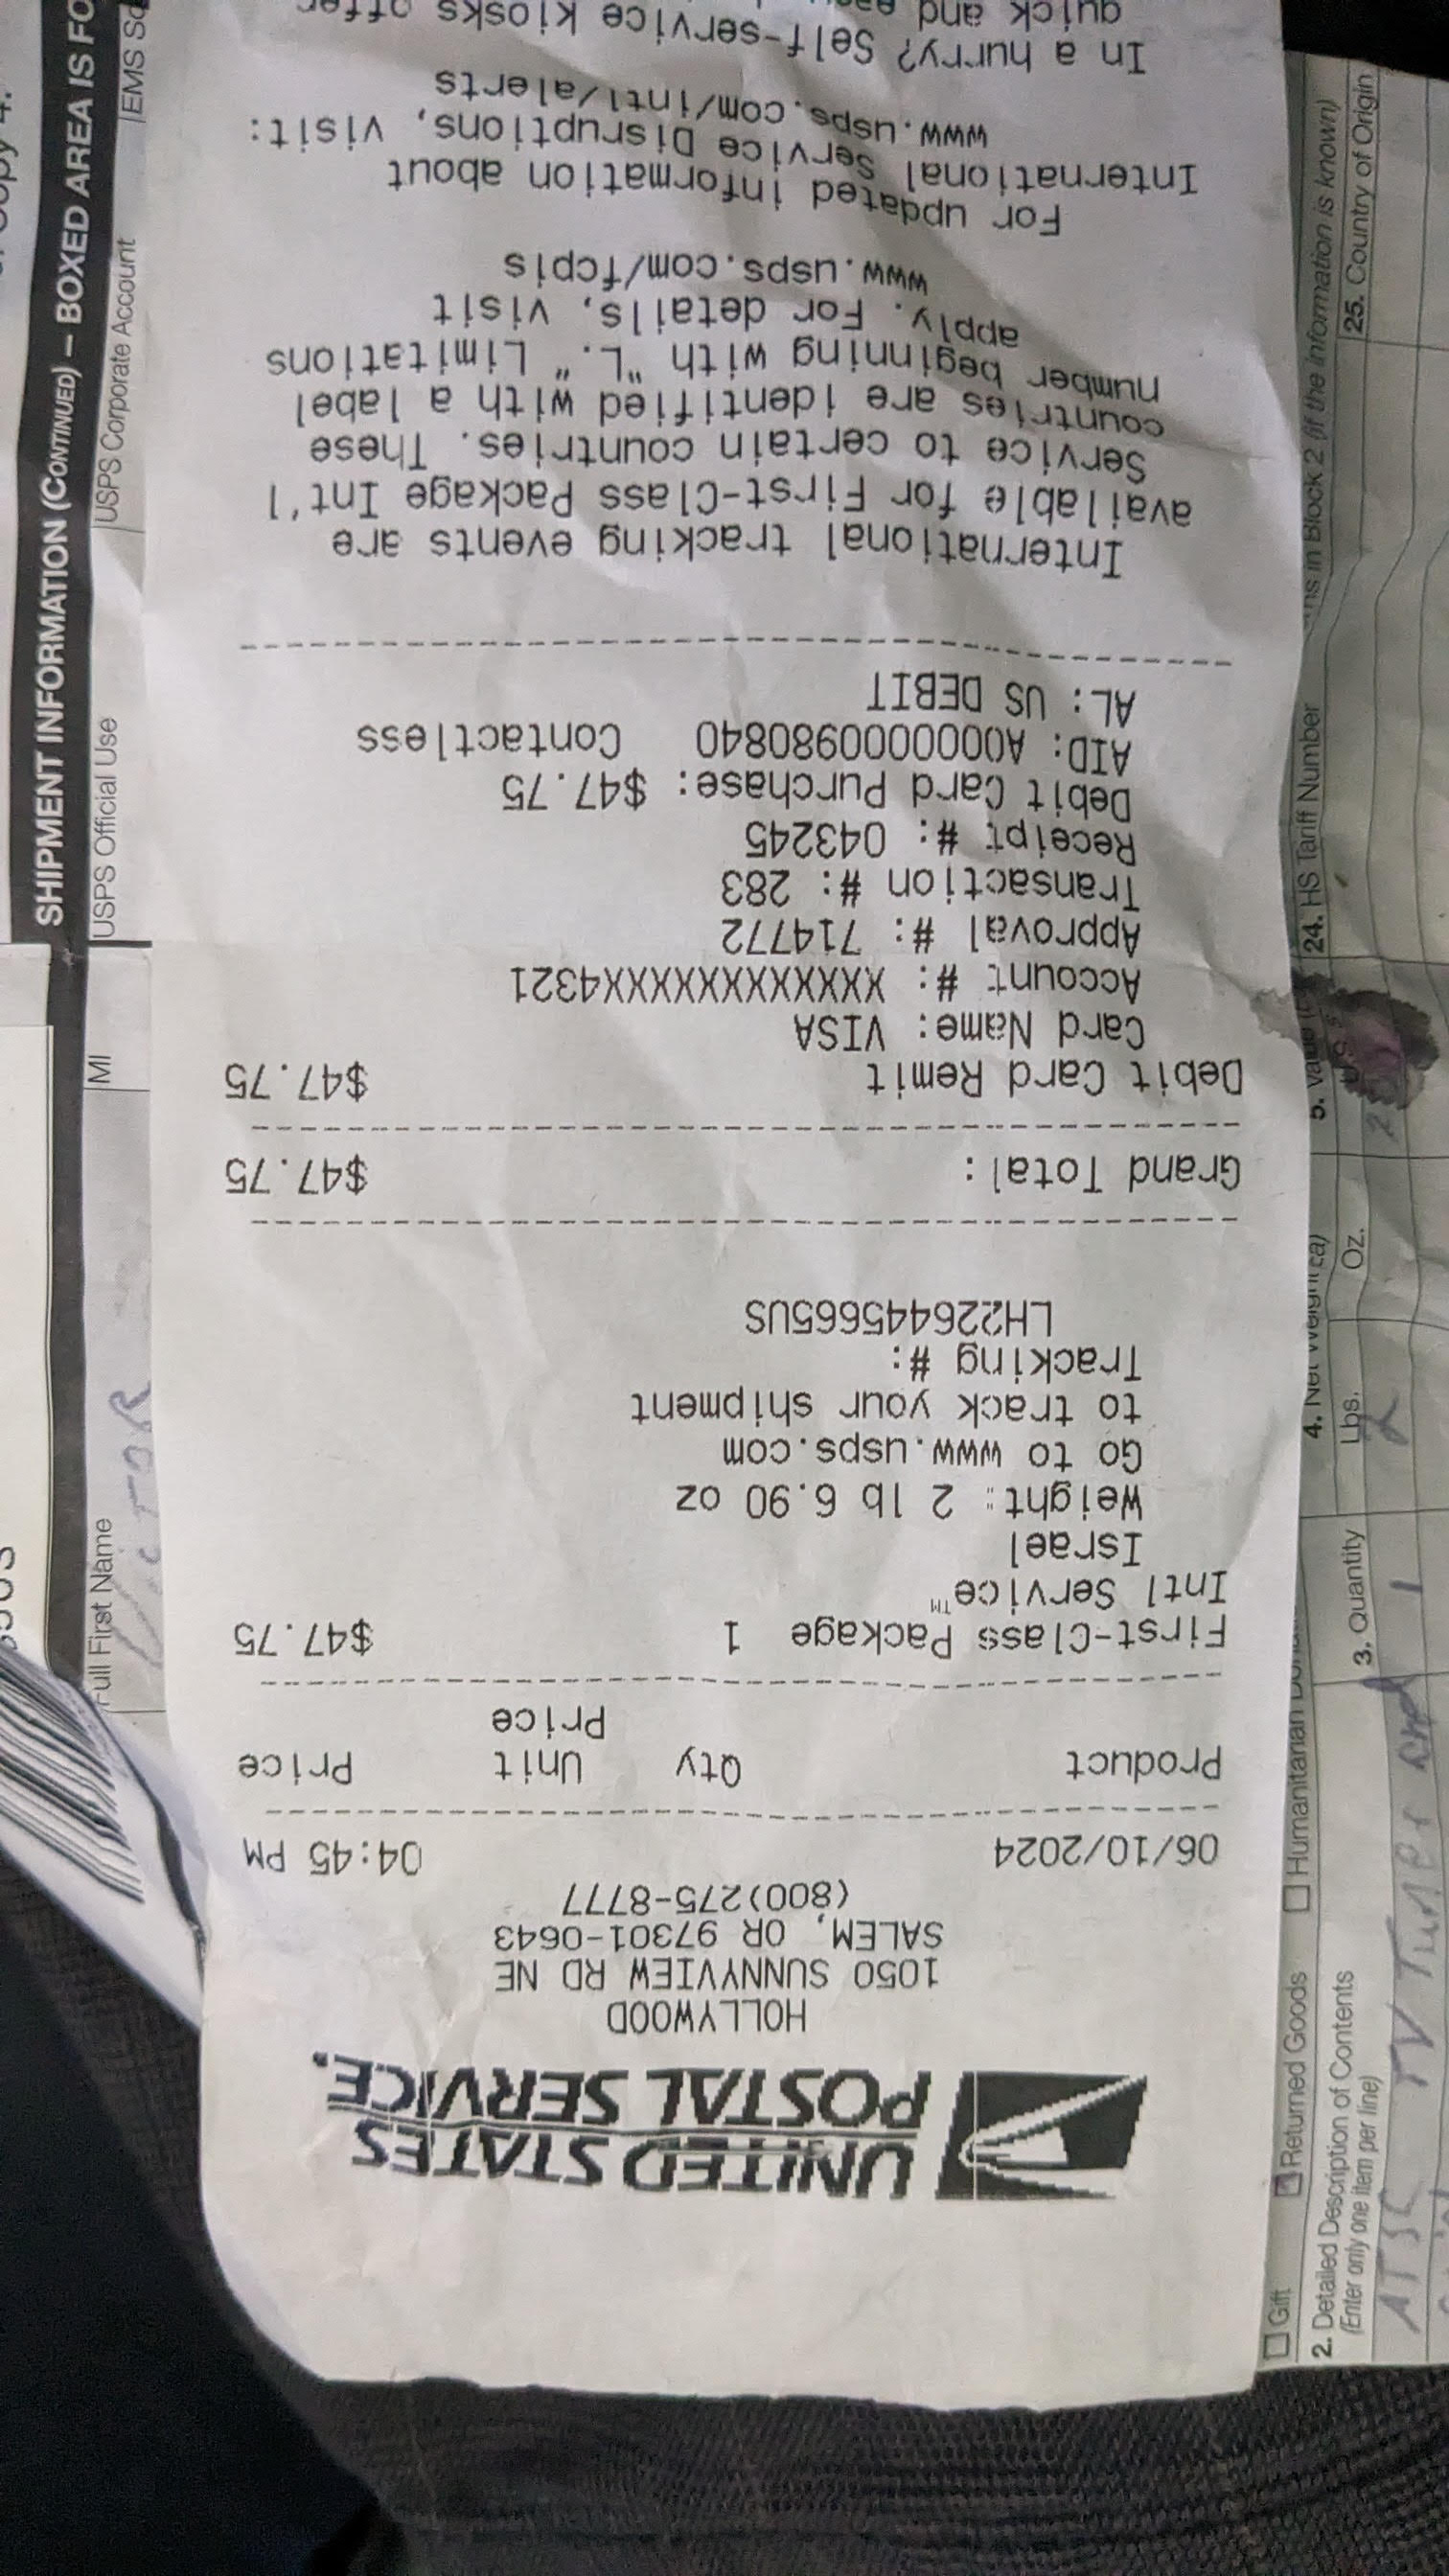 usps receipt with tracking